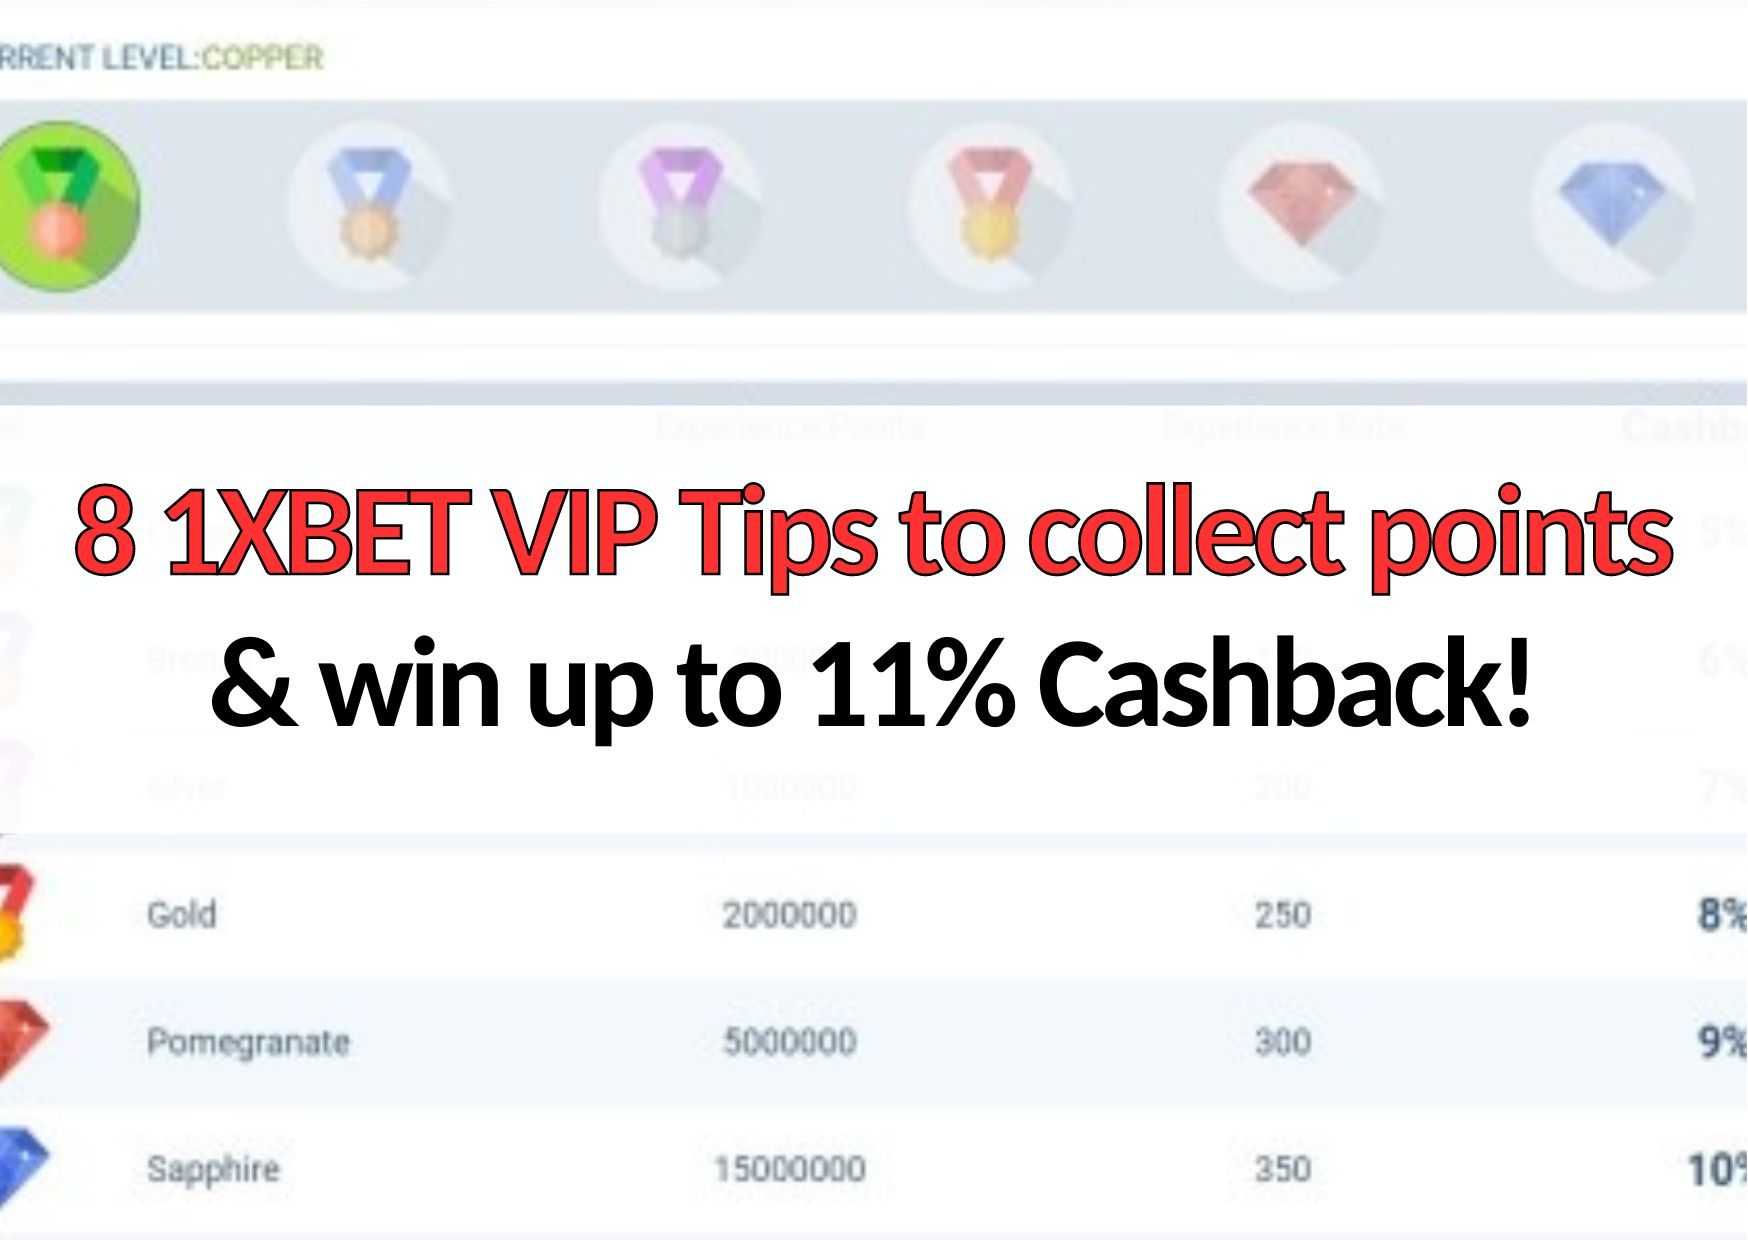 8 1xbet vip tips to collect points and win cashback returns